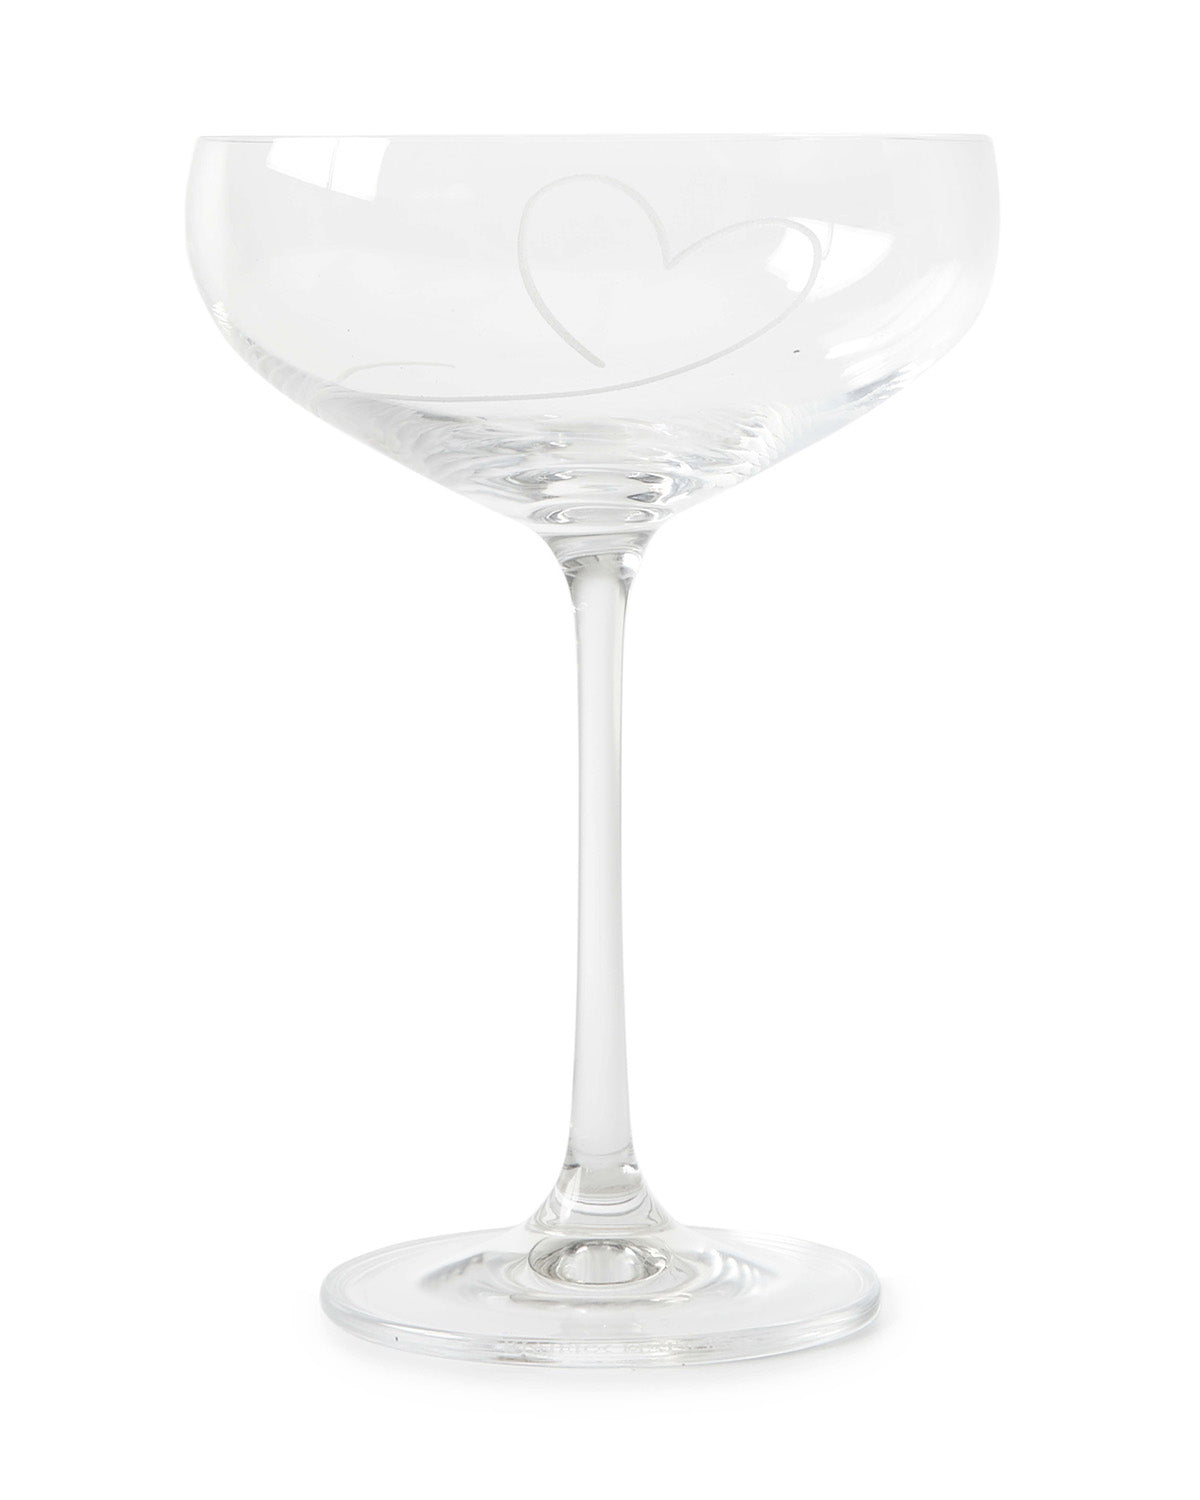 Champagne glass wit hand painted heart by Riviera Maison